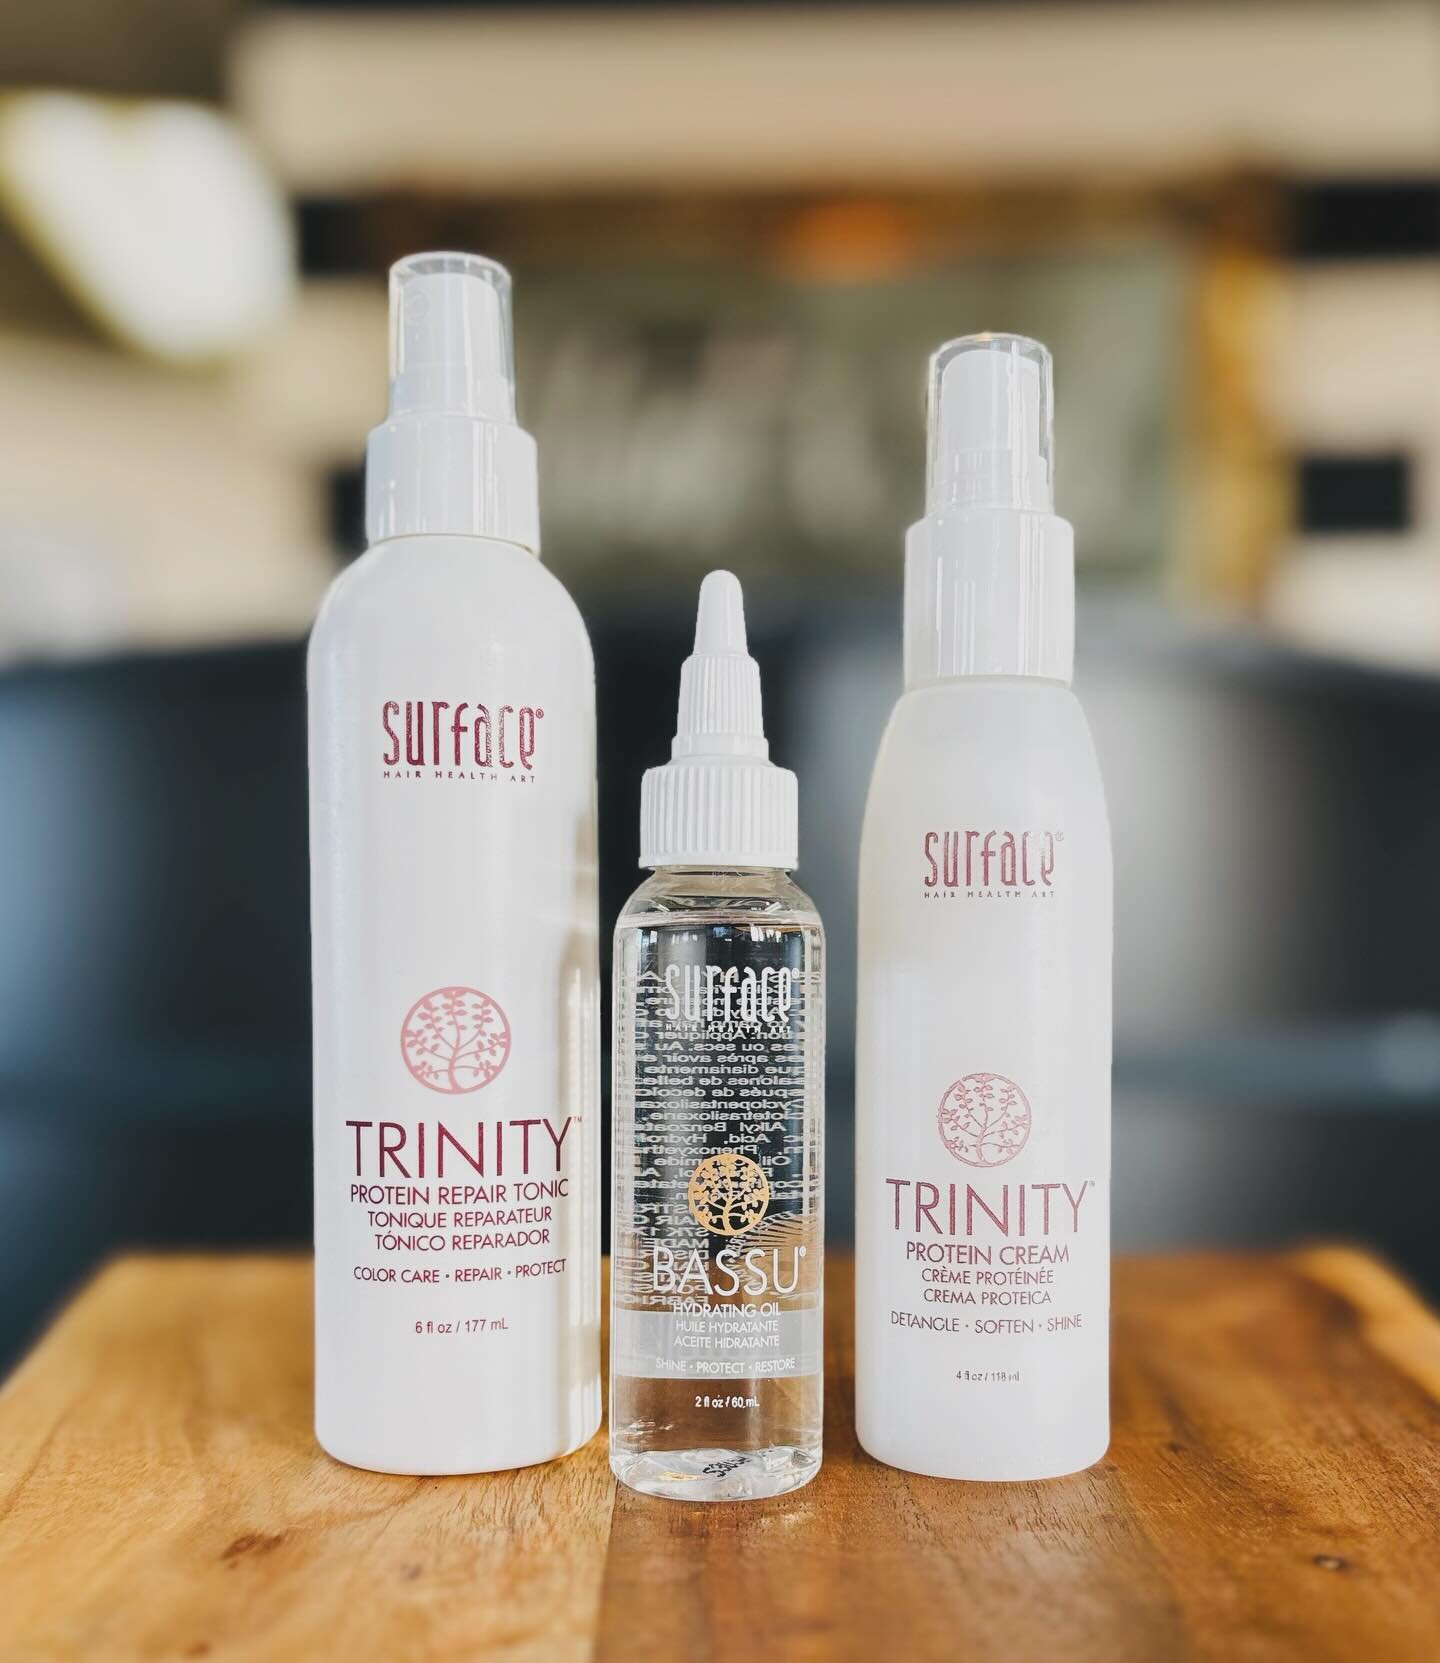 Check out this amazing trio✨ These three products will become your new BFFs🩵

These products are great for restoring, protecting, creating a natural shine, and more for normal to fine hair! 

✨The Trinity Repair Tonic contains amaranth, soy, and ker